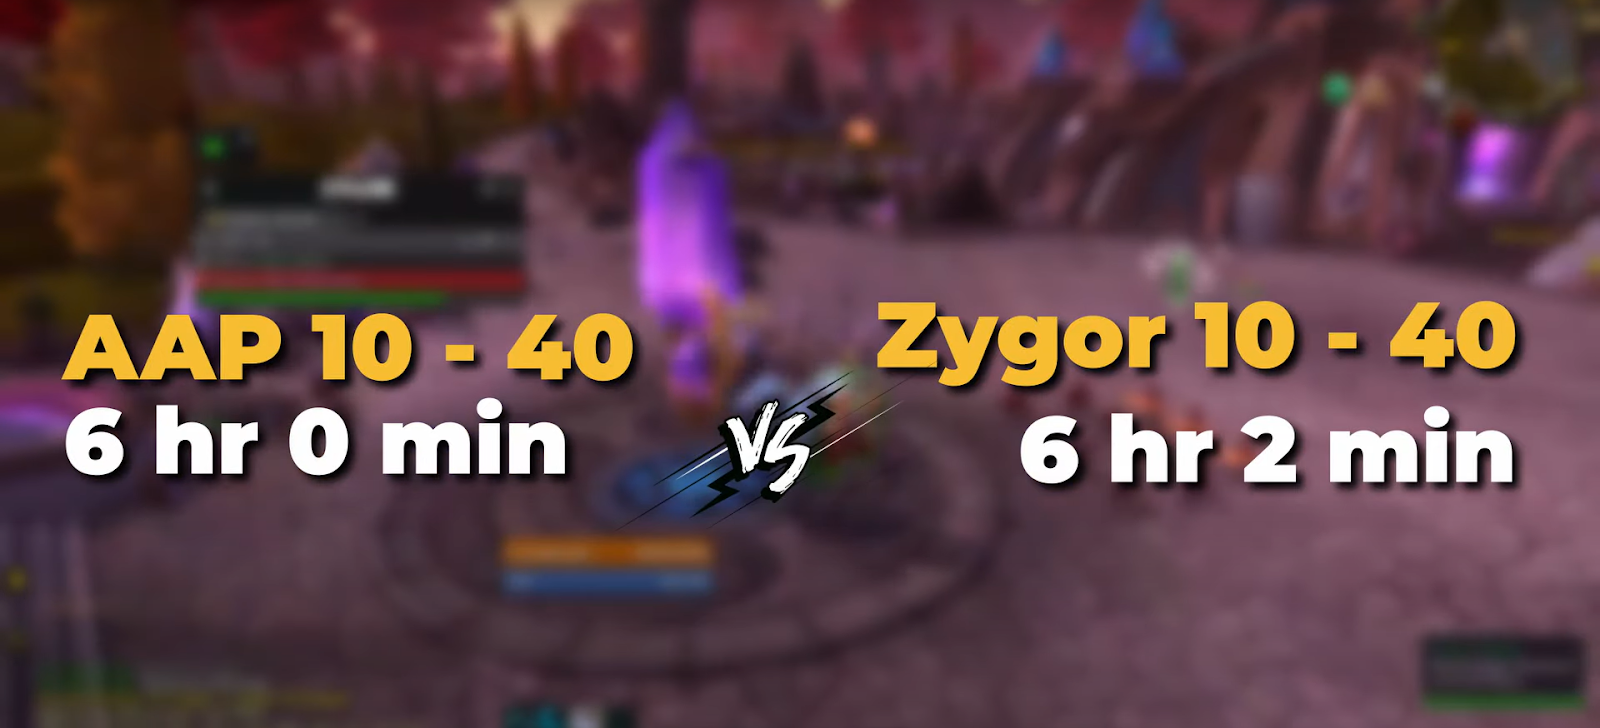 Screenshot showing a comparison between Zygor and Azeroth Auto Pilot (AAP) at level 40